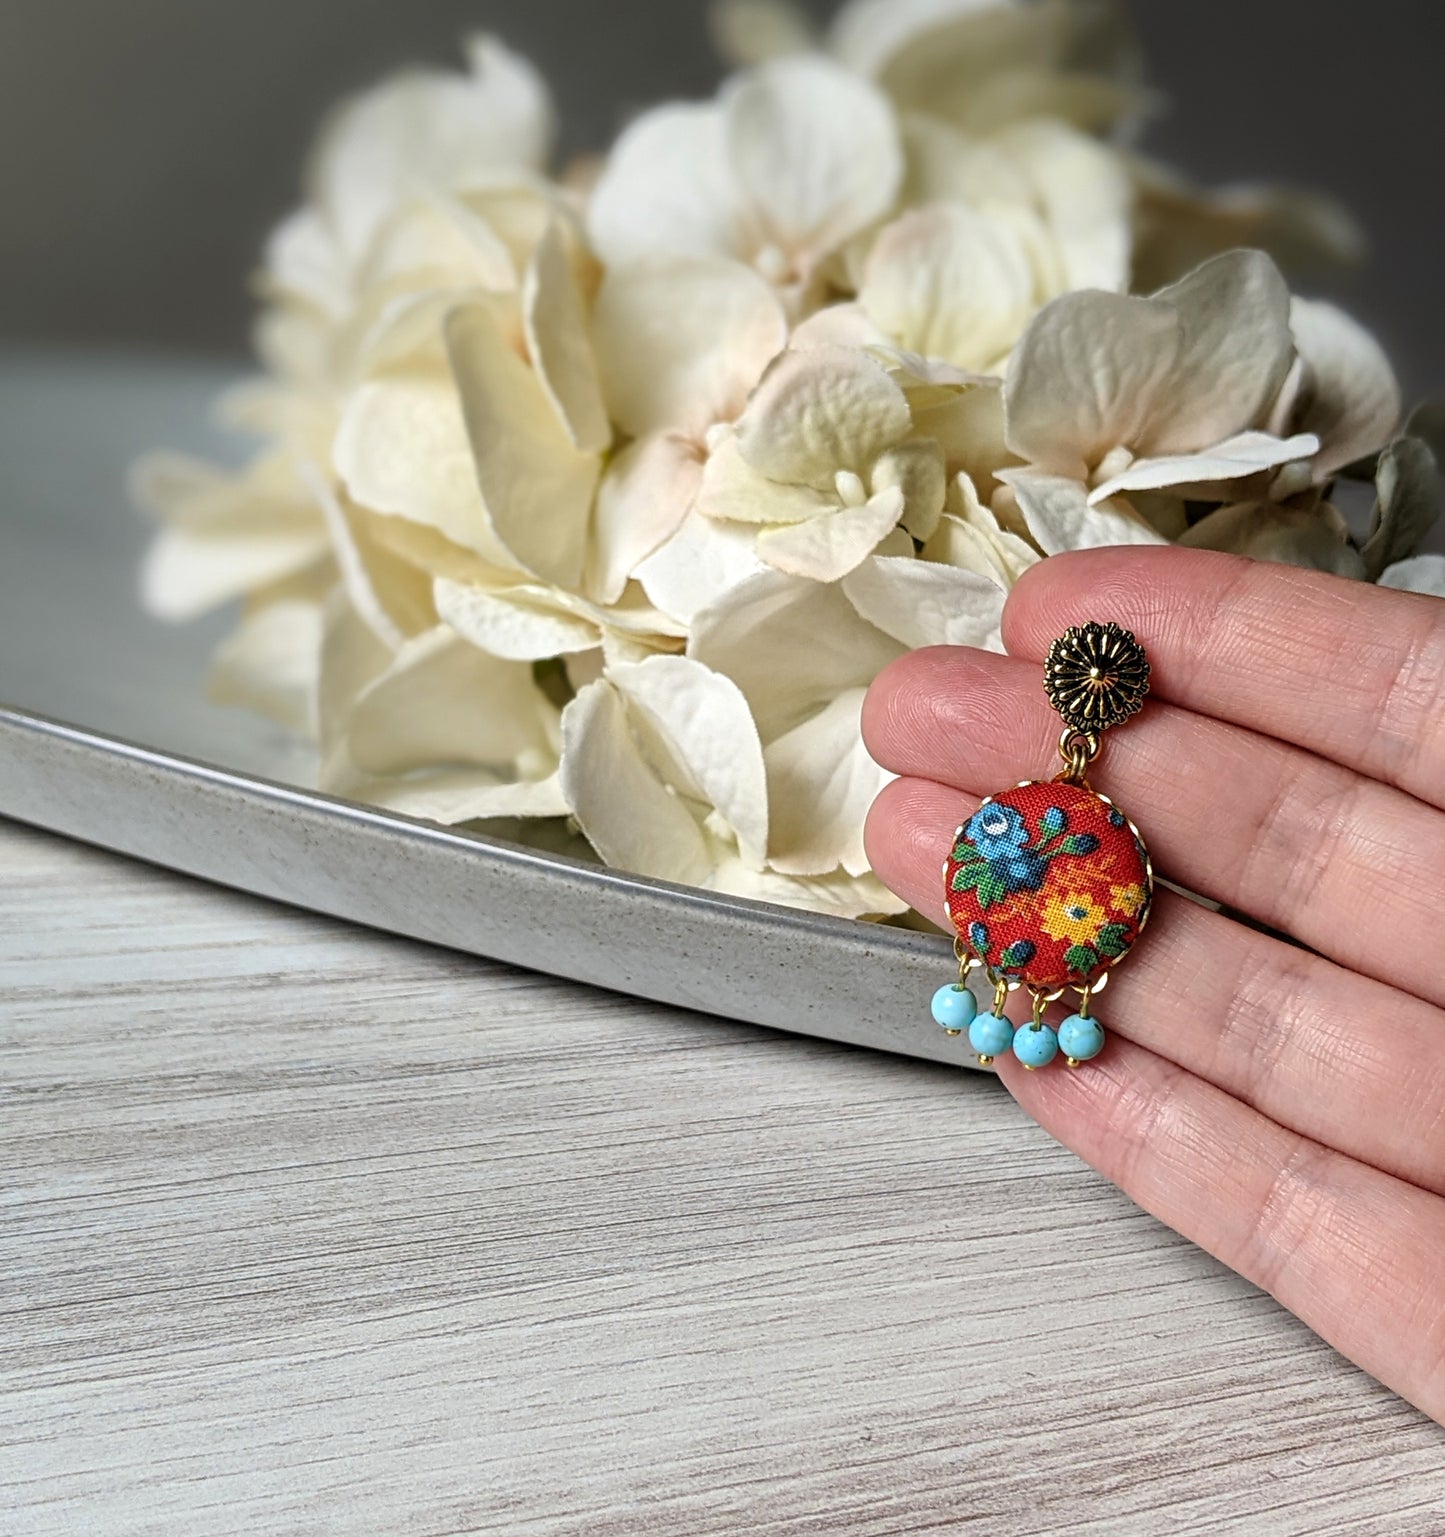 Red And Turquoise Earrings With Vintage Floral Print Fabric And Glass Beads